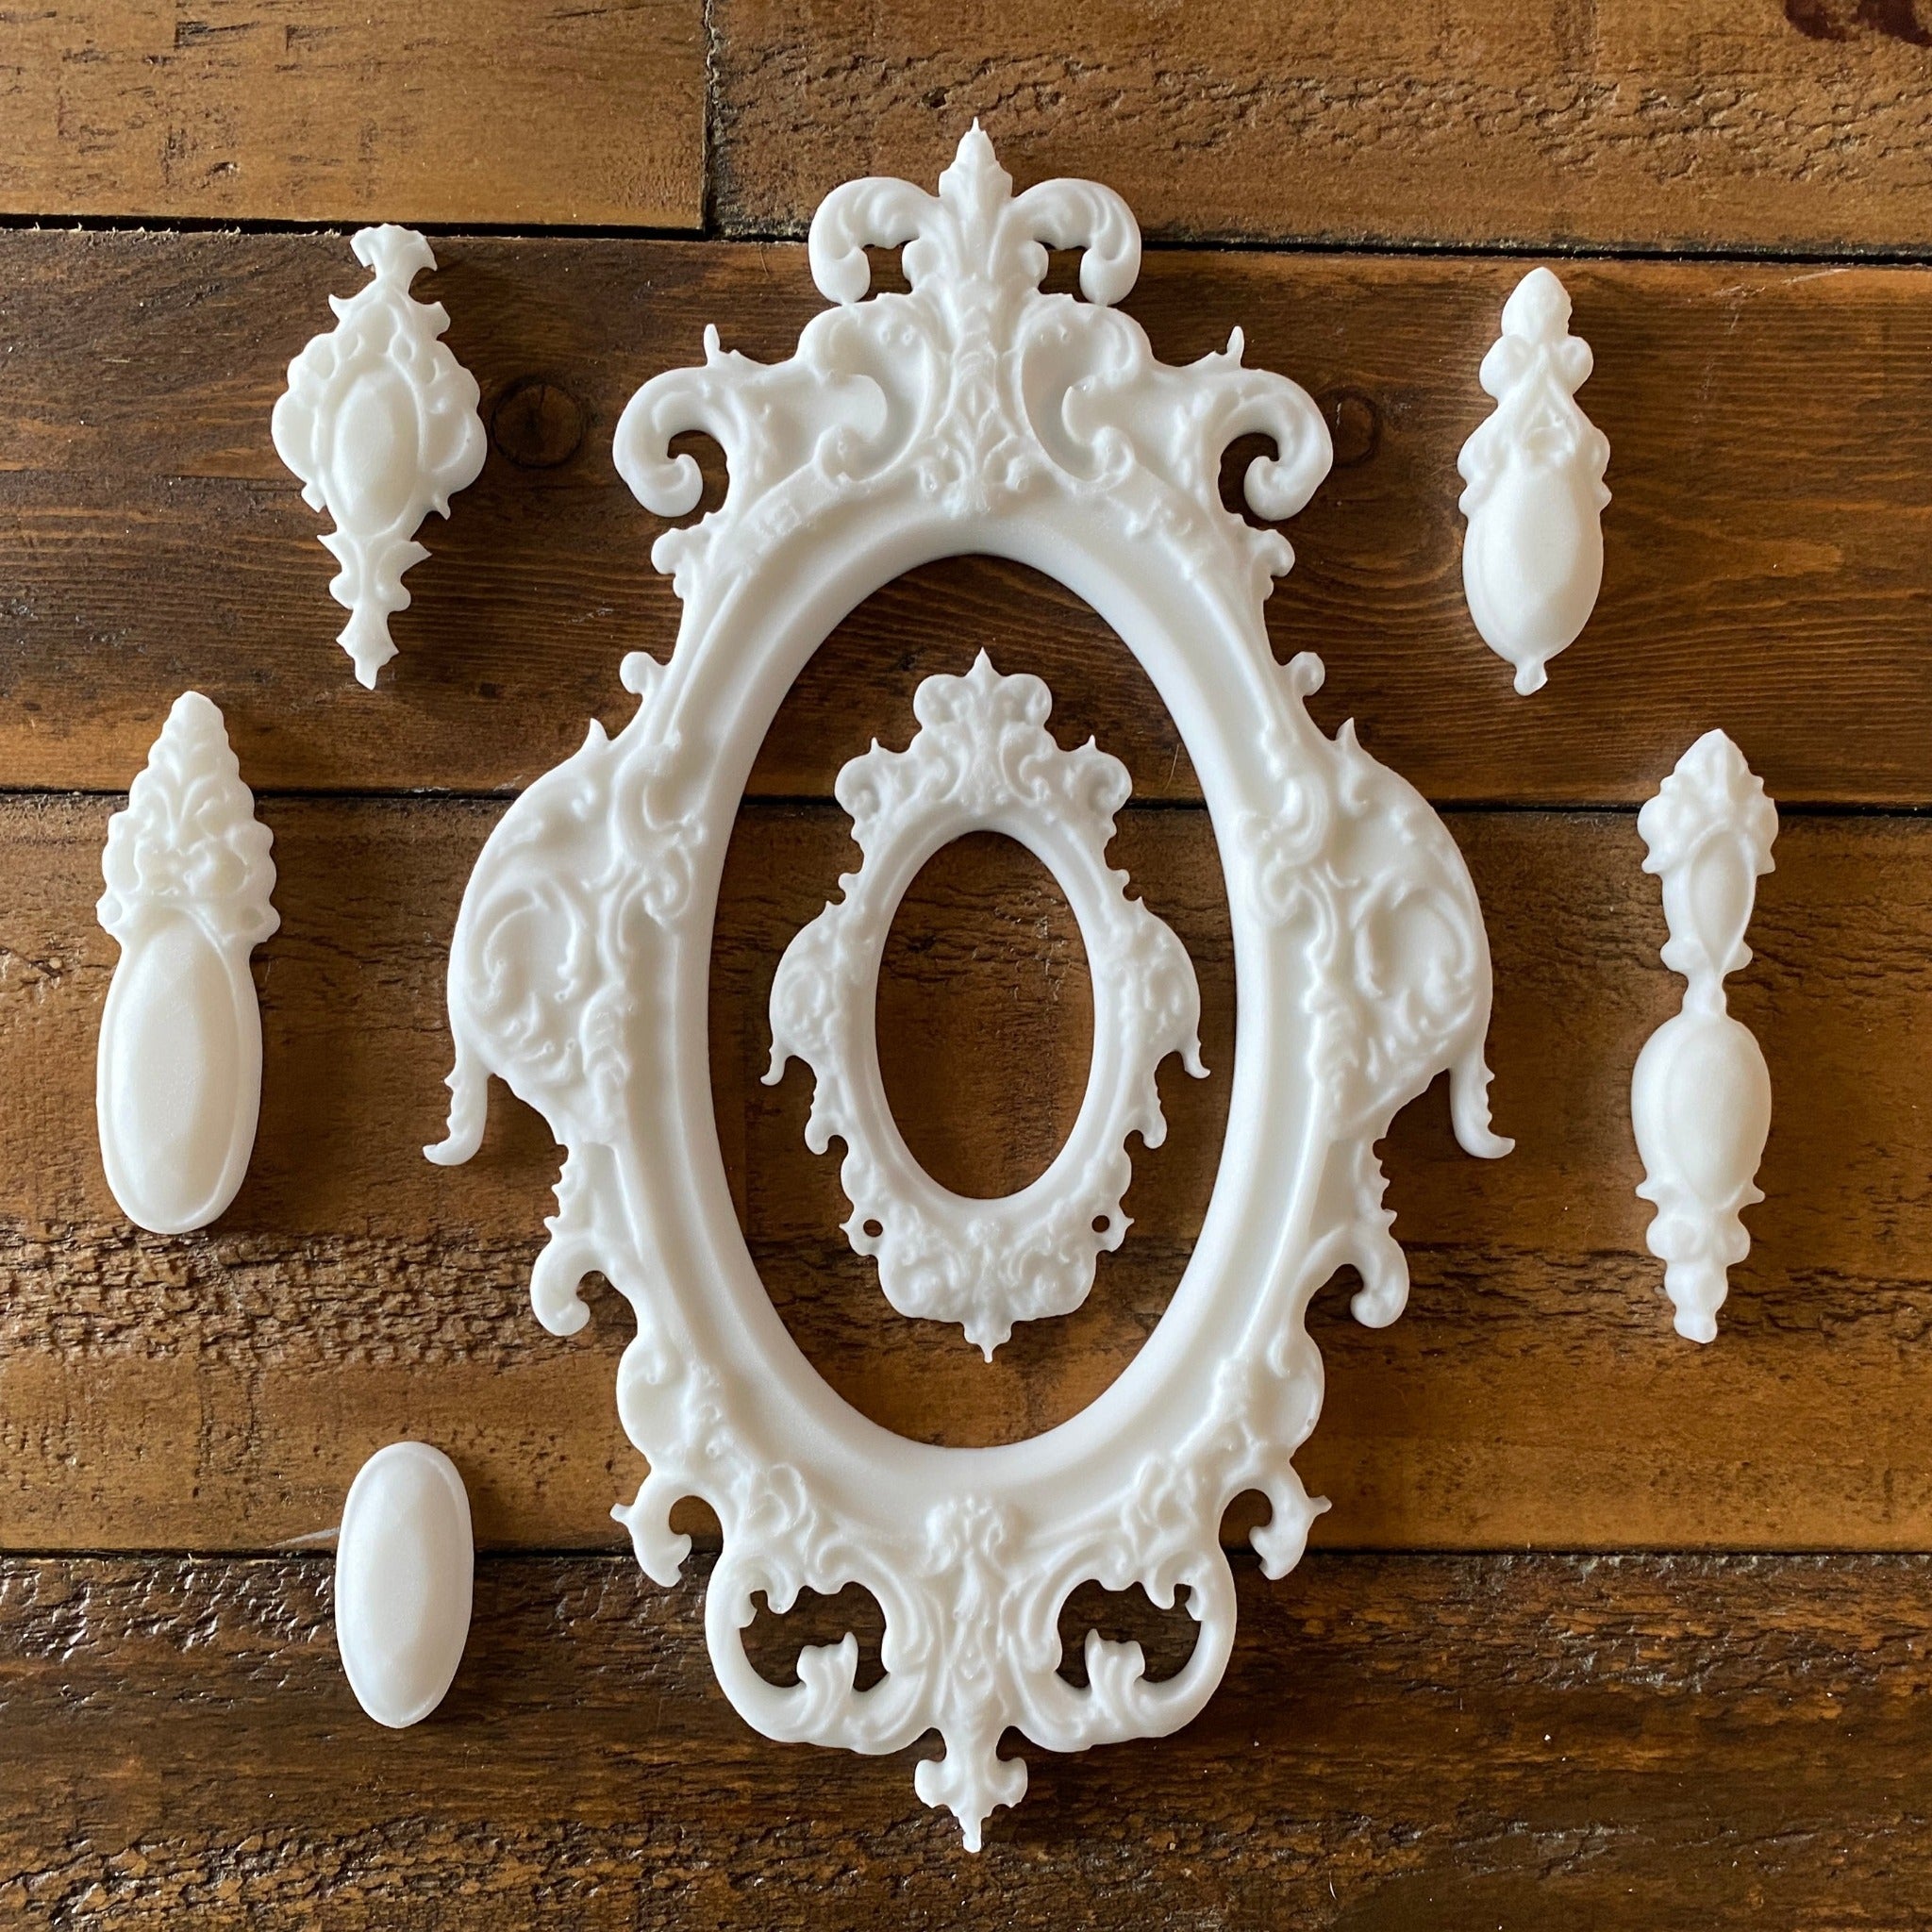 White silicone mould castings of 2 ornate oval frames and 5 ornate pendants are against a wood background.